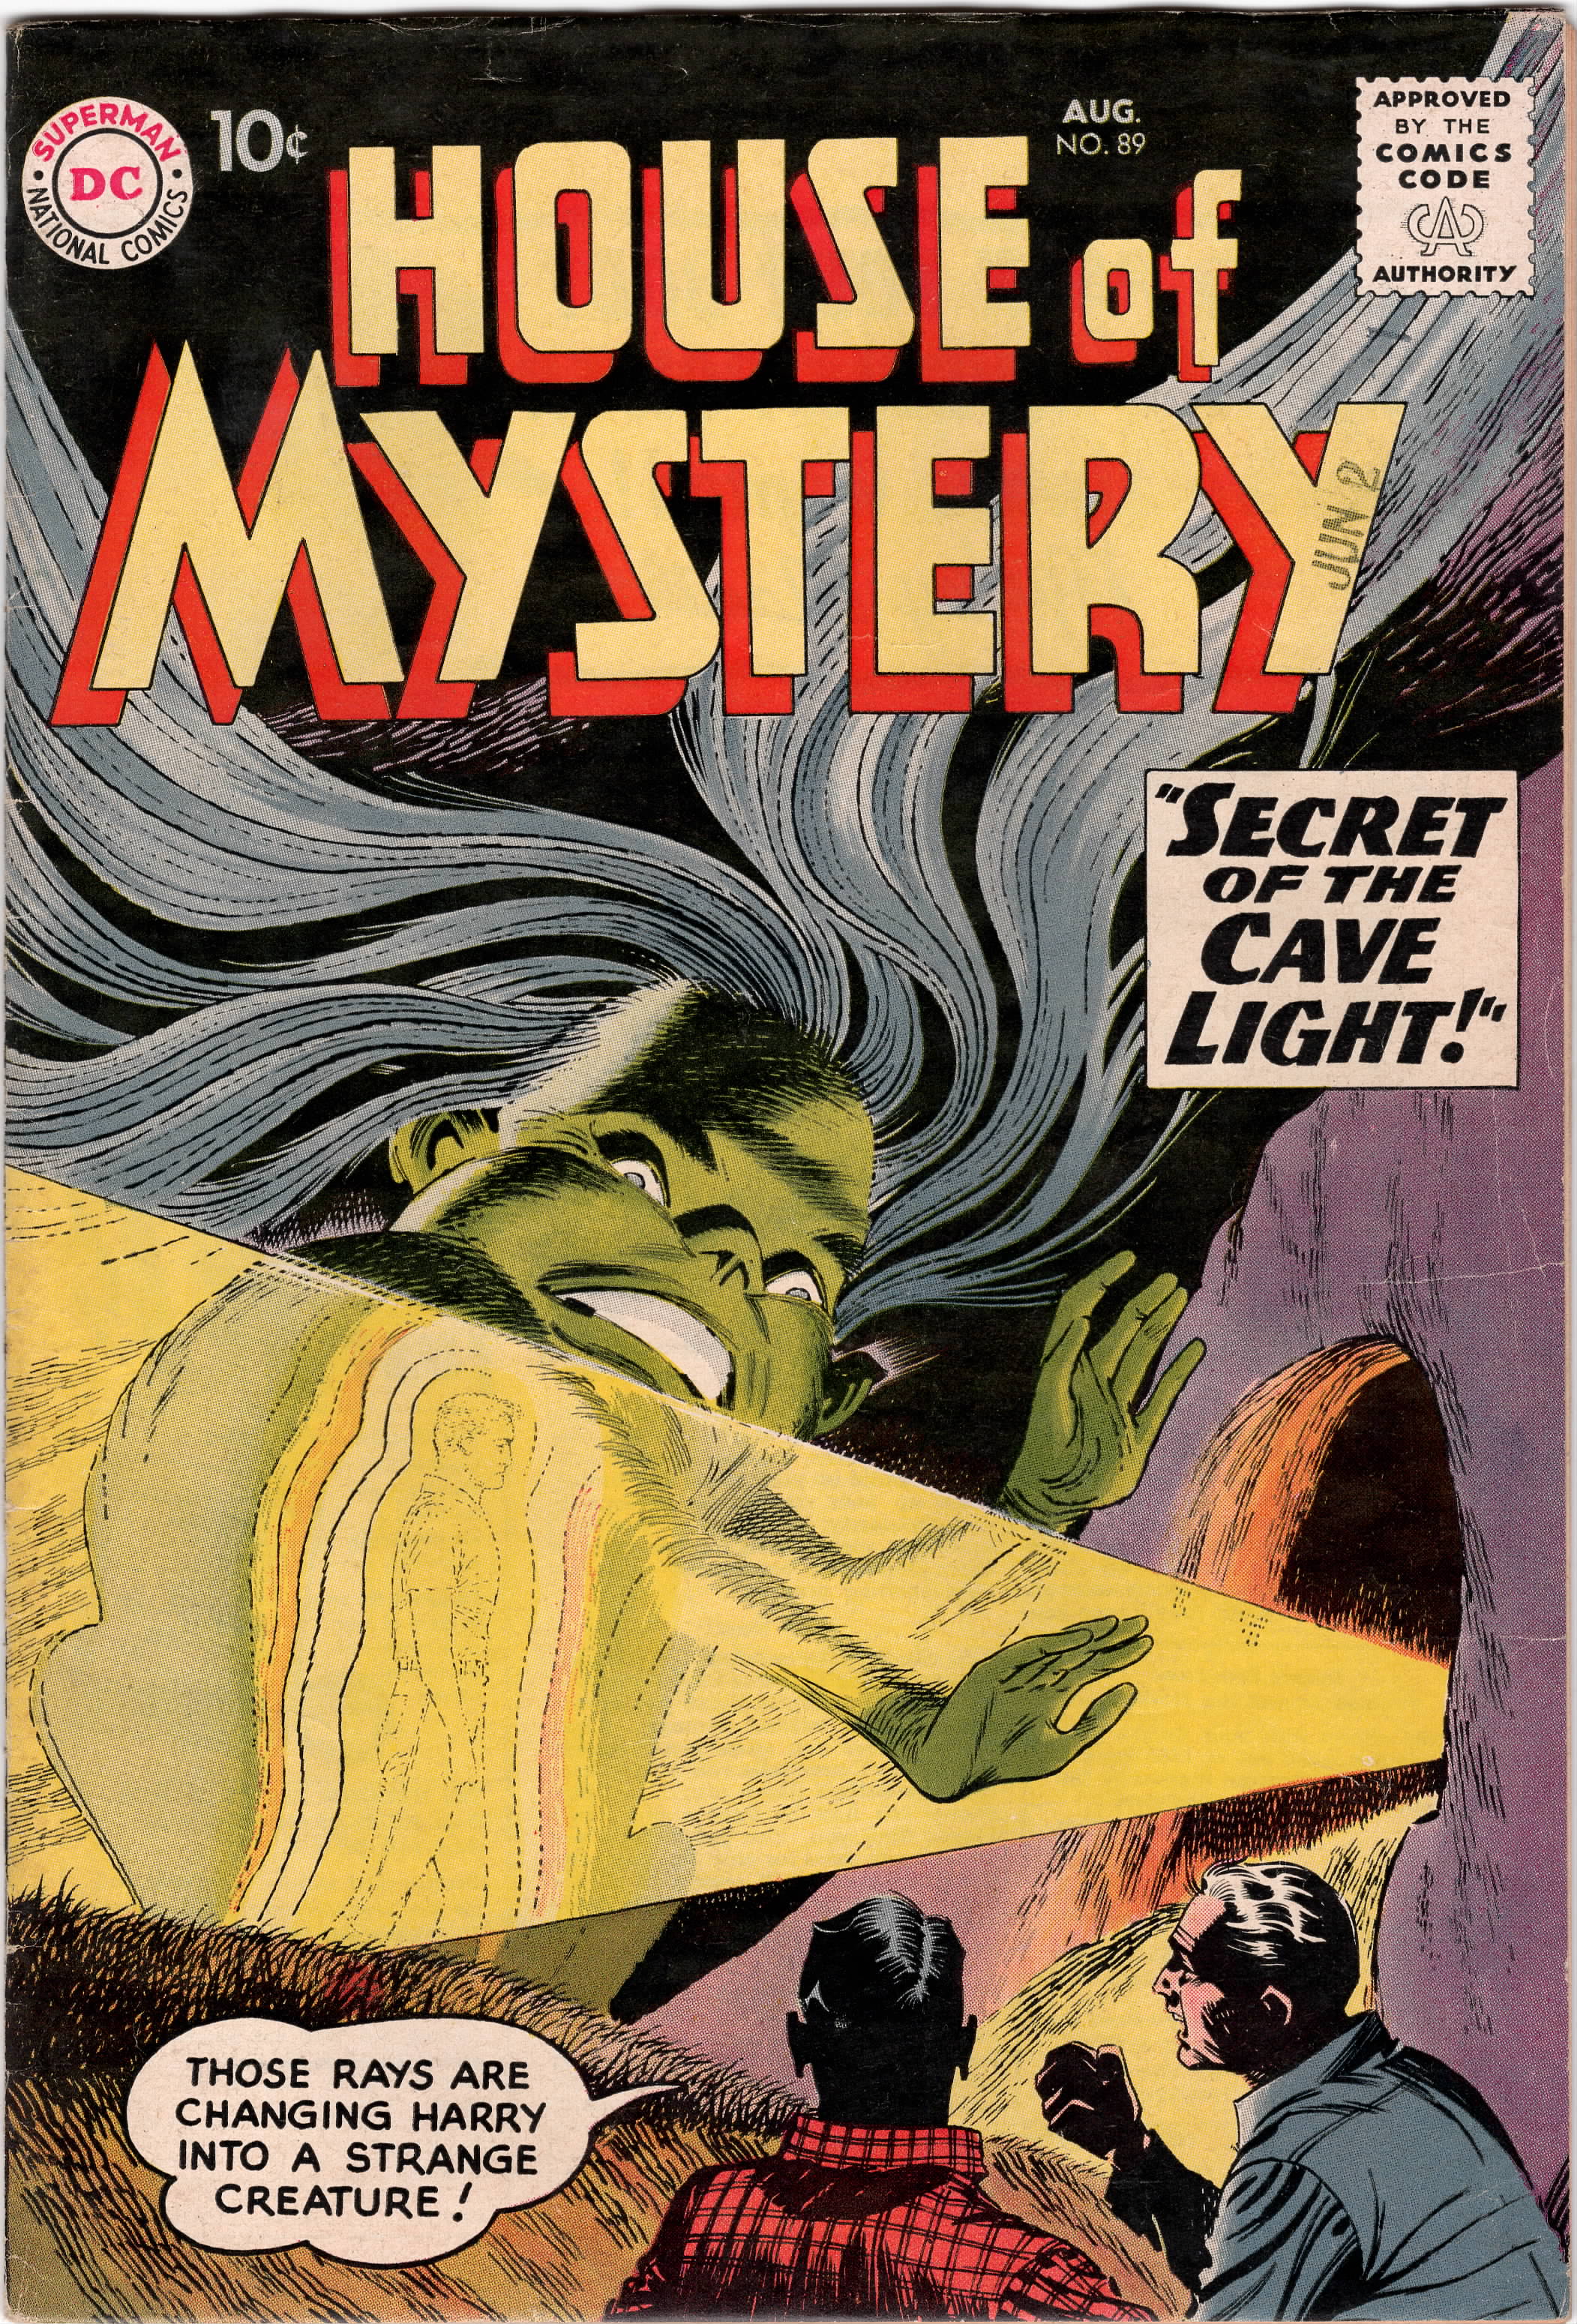 House of Mystery #089